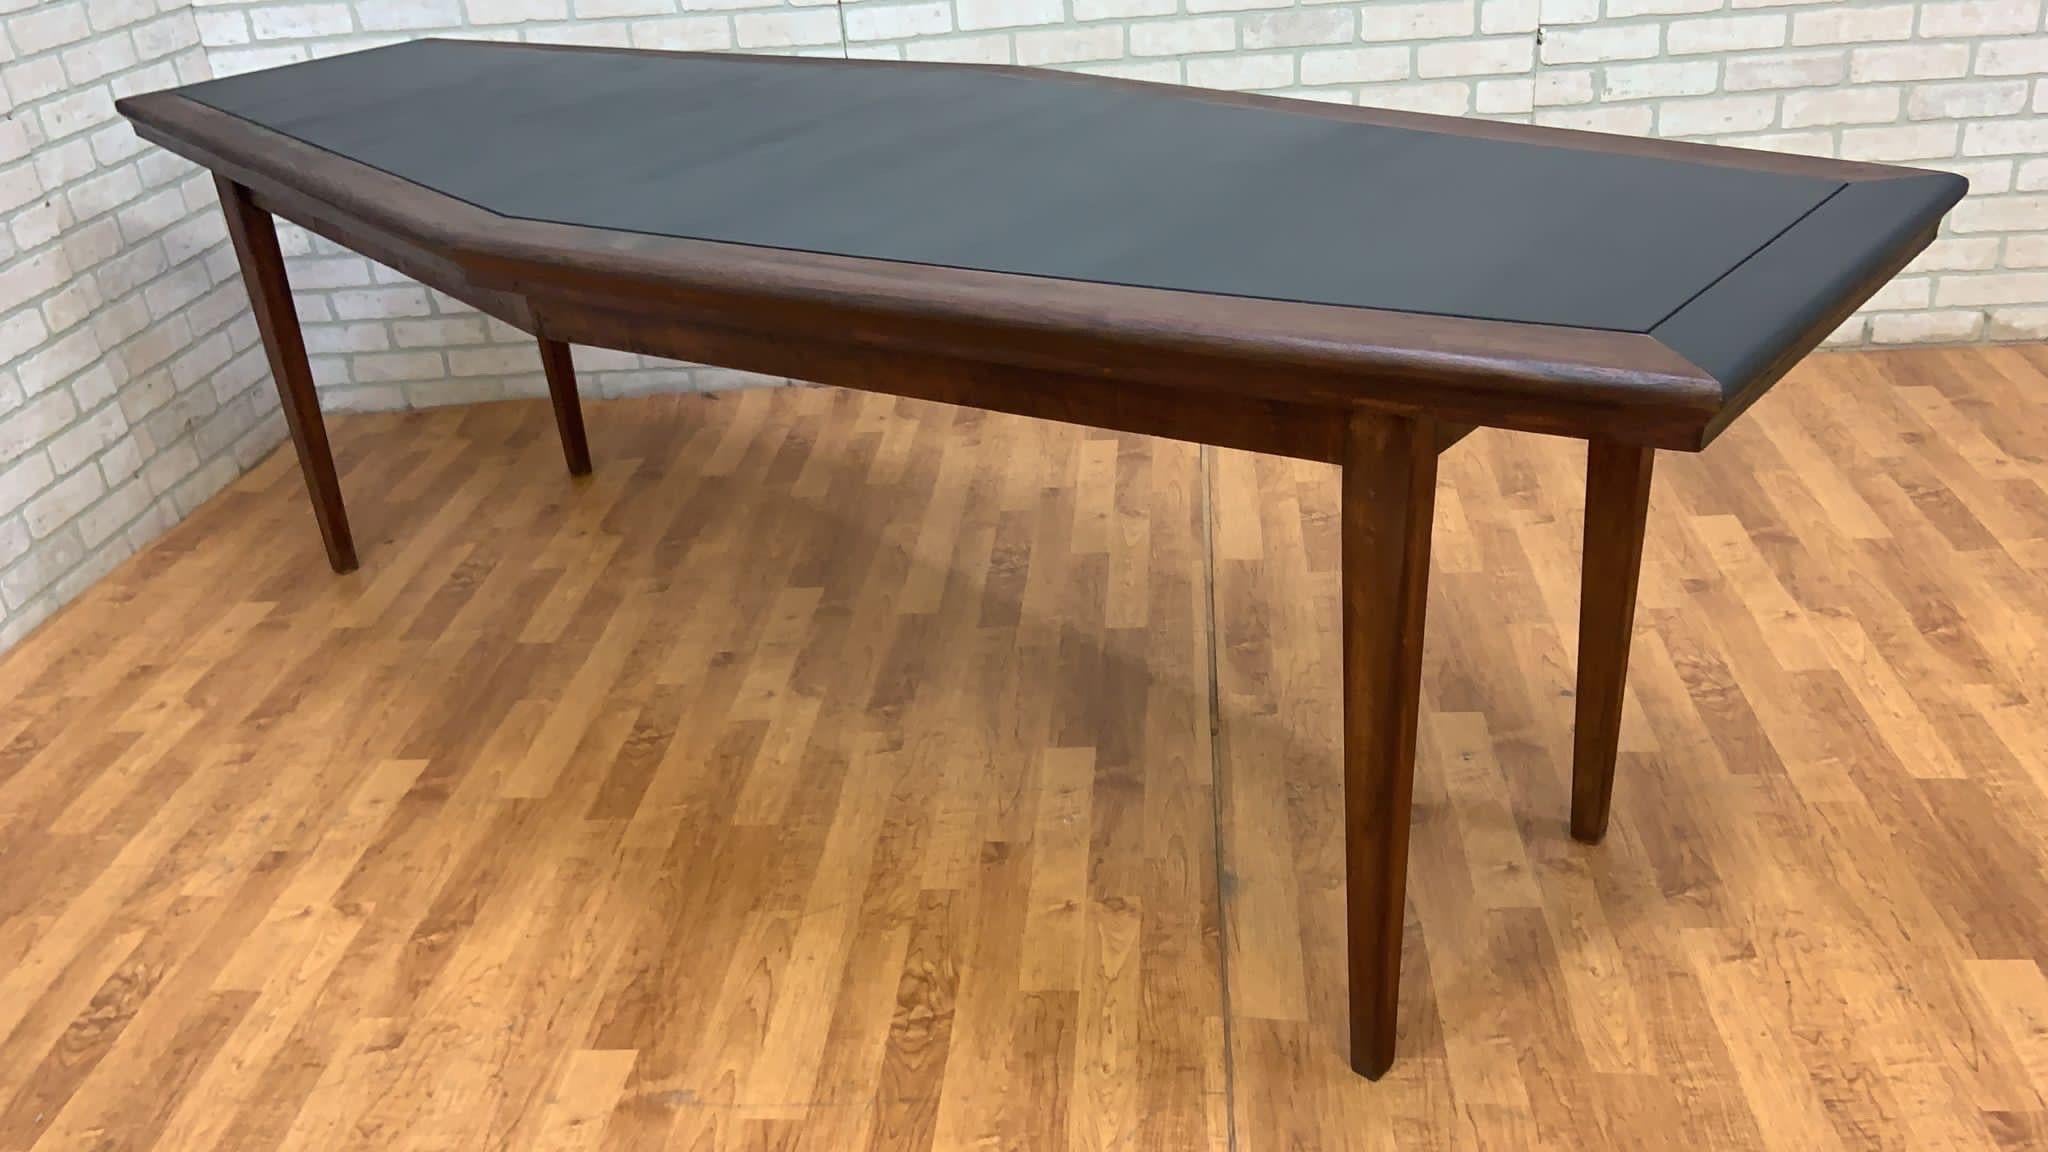 Hand-Crafted Midcentury Danish Walnut Narrow Boat Shaped Table with Black Laminate Inlay For Sale